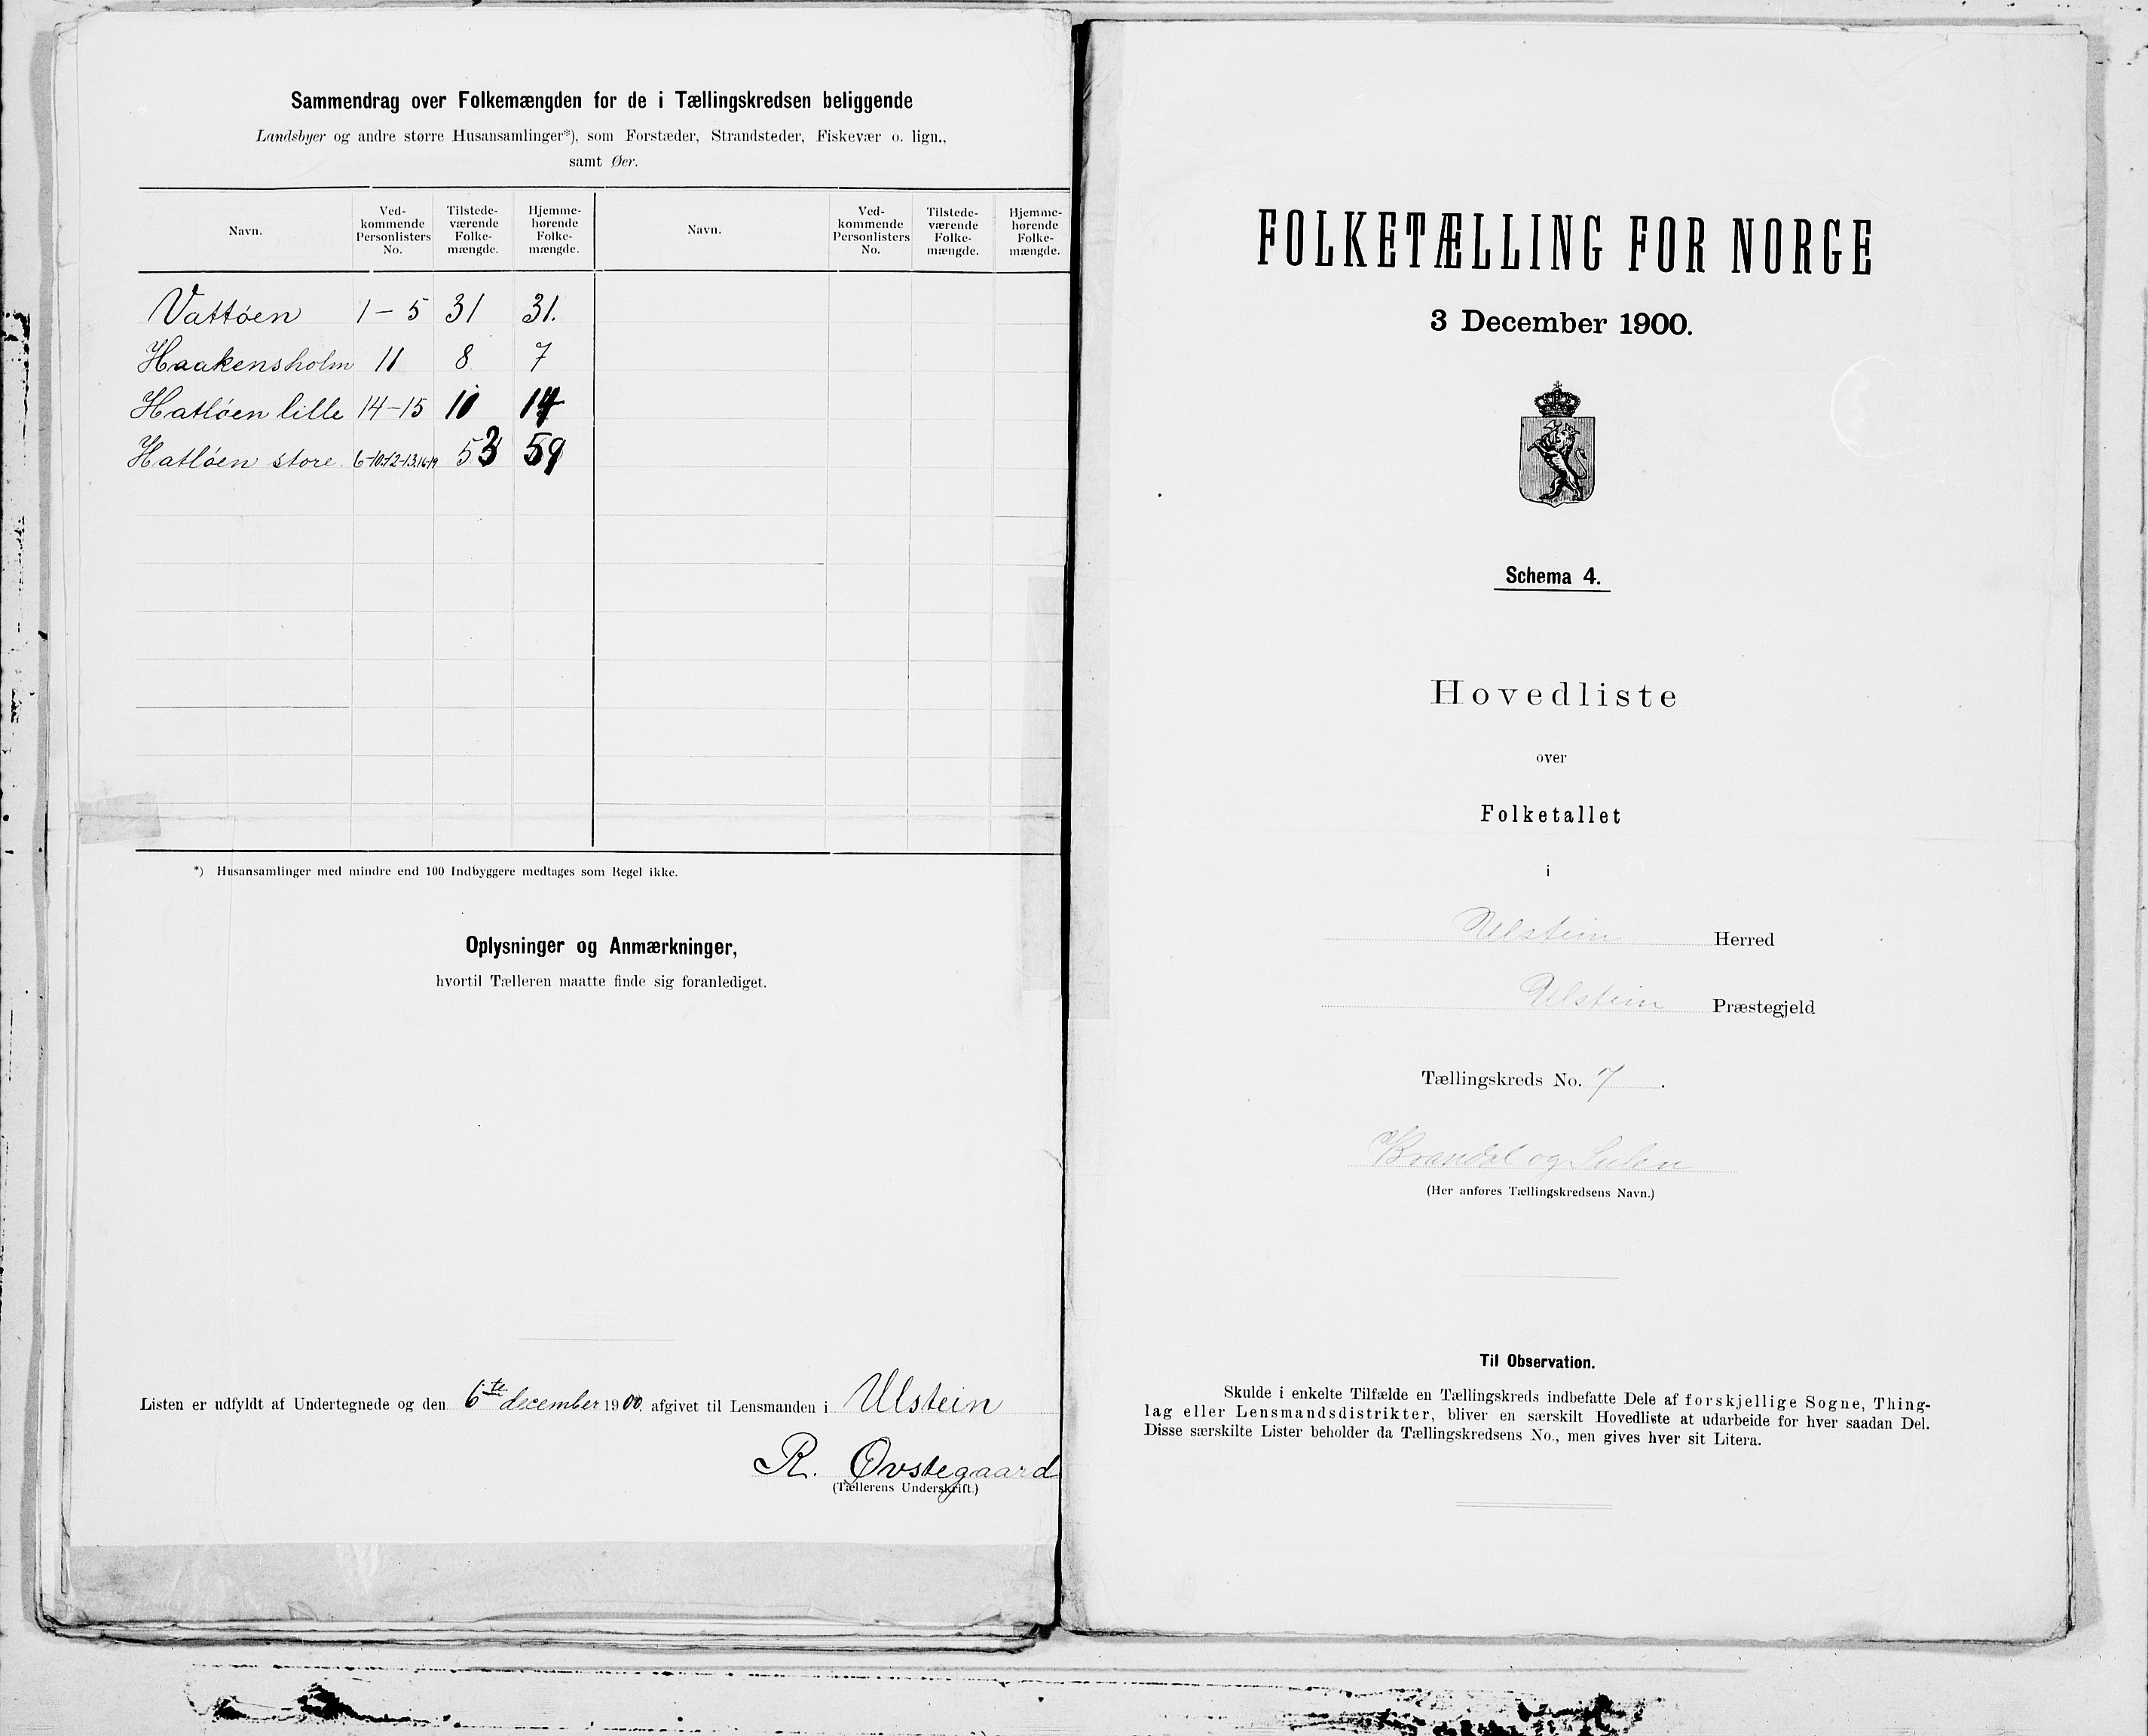 SAT, 1900 census for Ulstein, 1900, p. 14